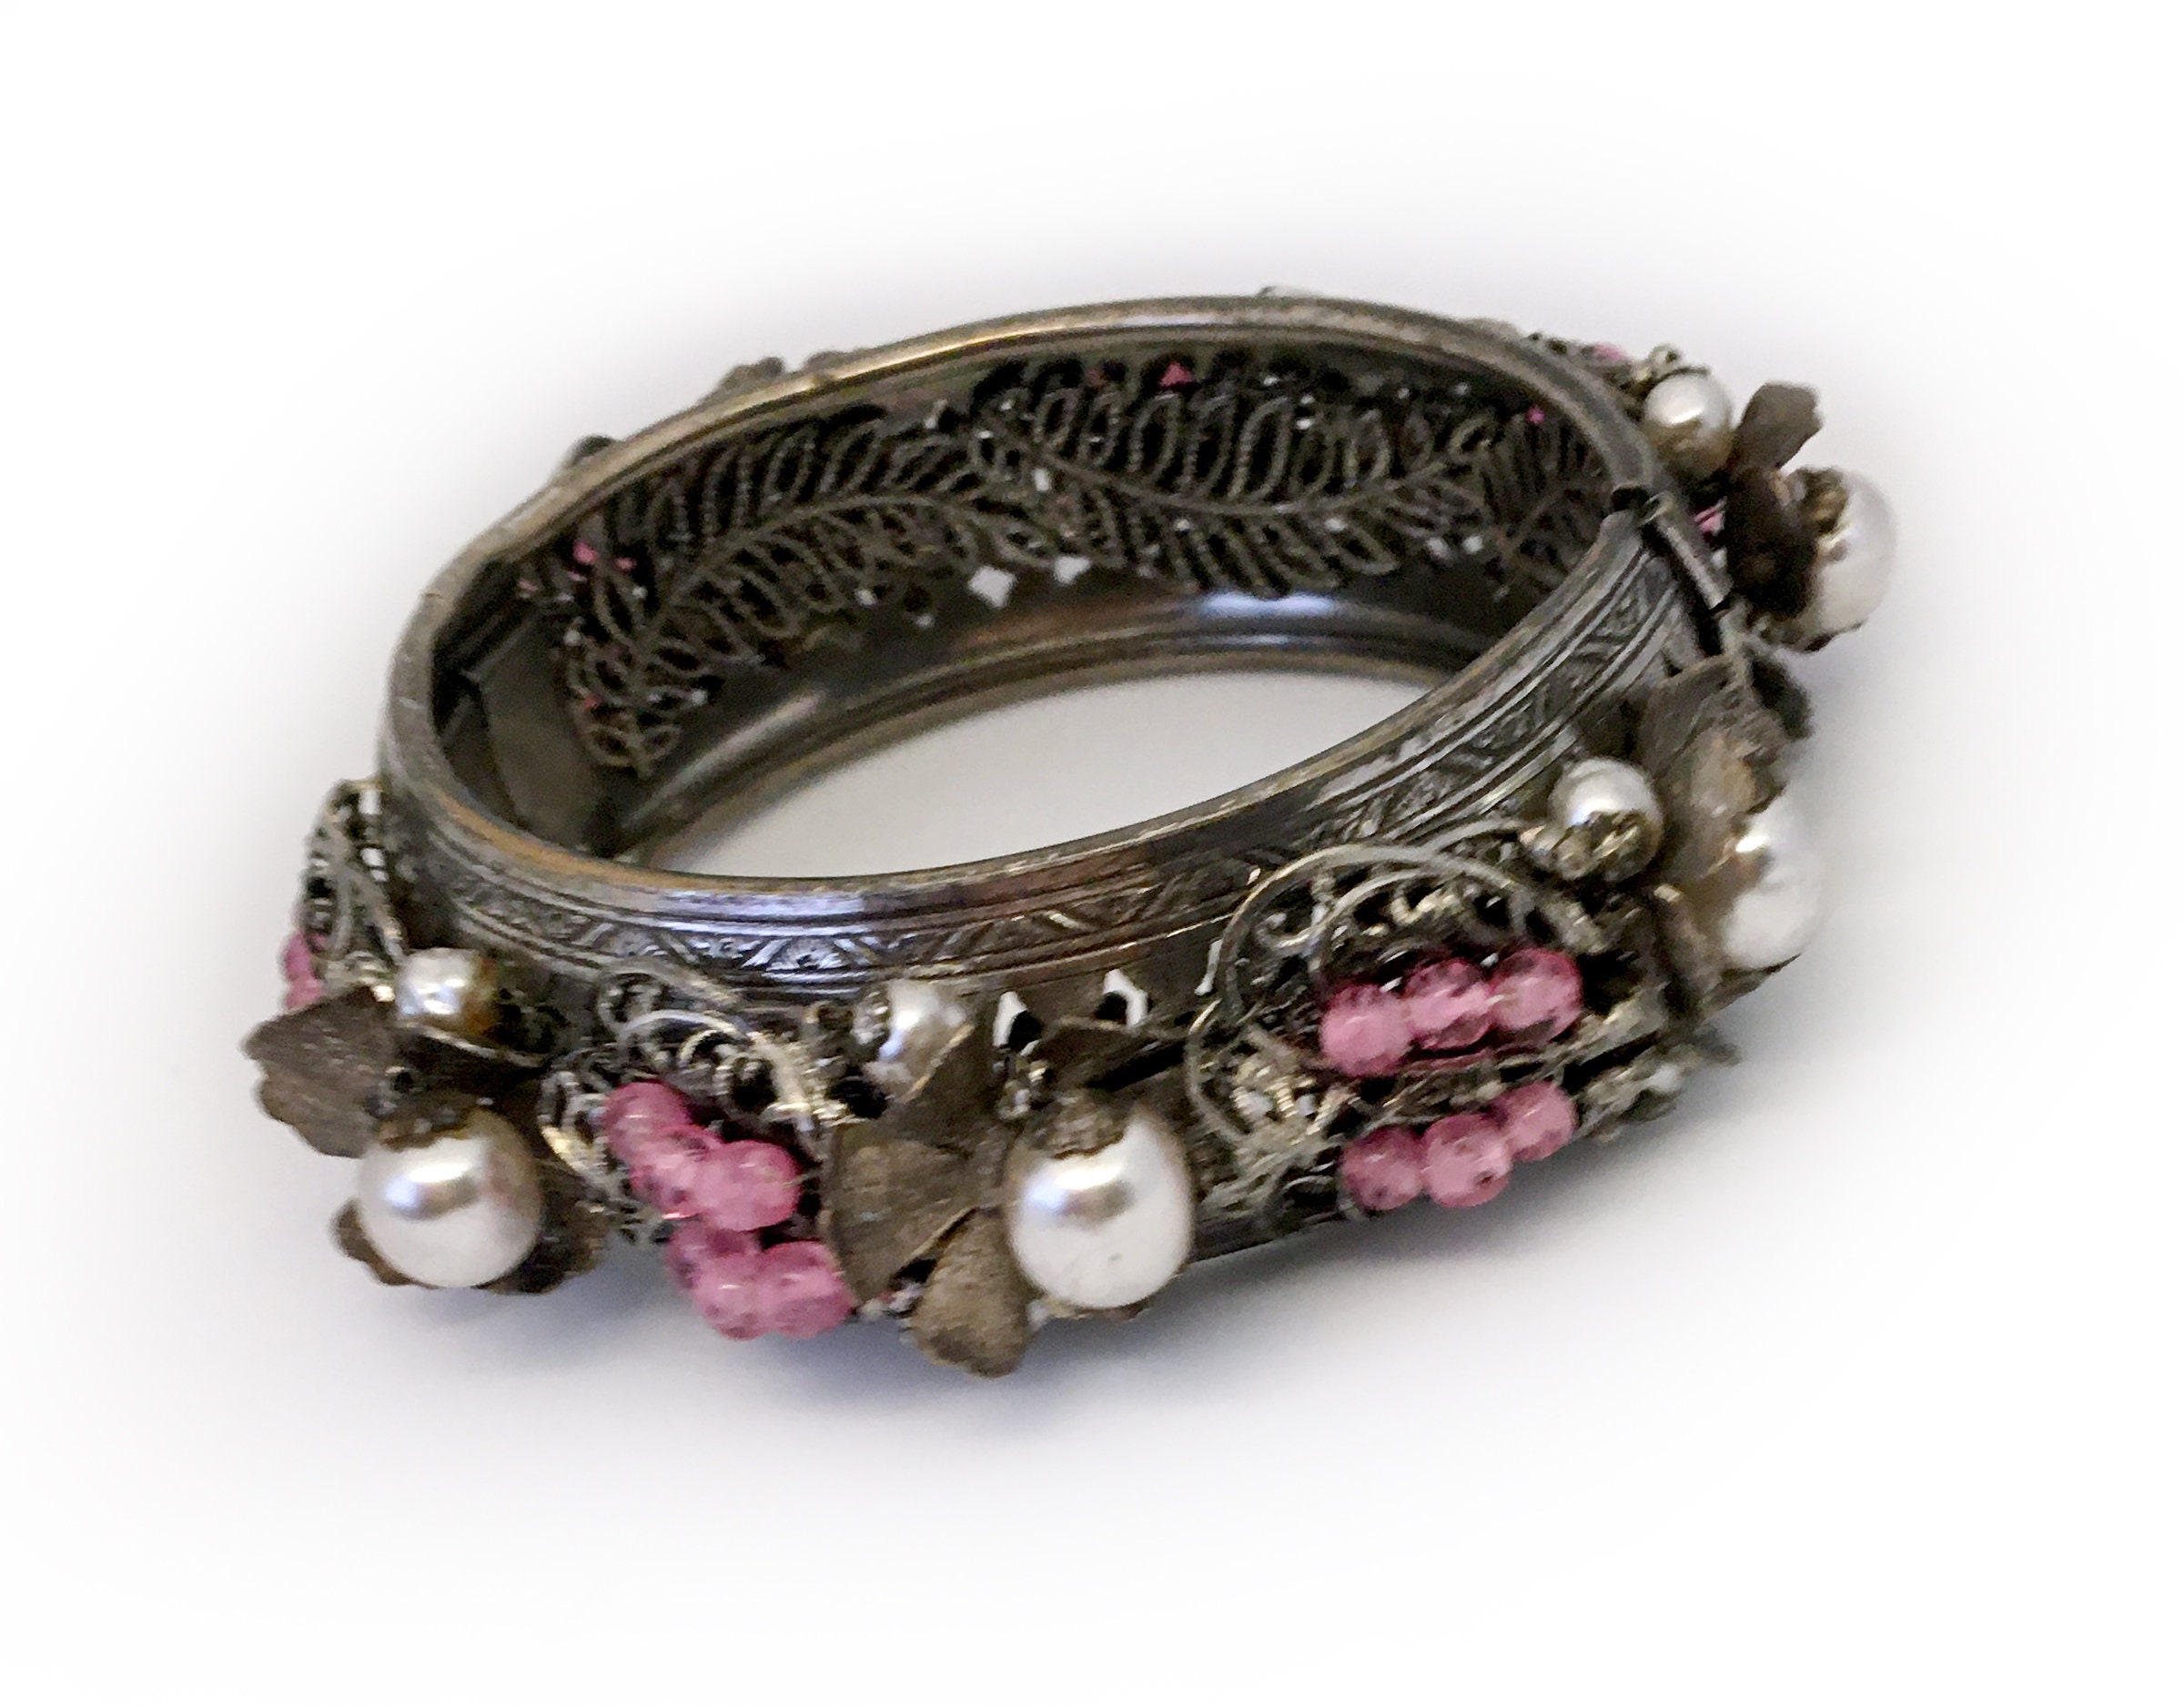 Haskell Floral Bangle Bracelet with Faux Baroque Pearls & Pink Art